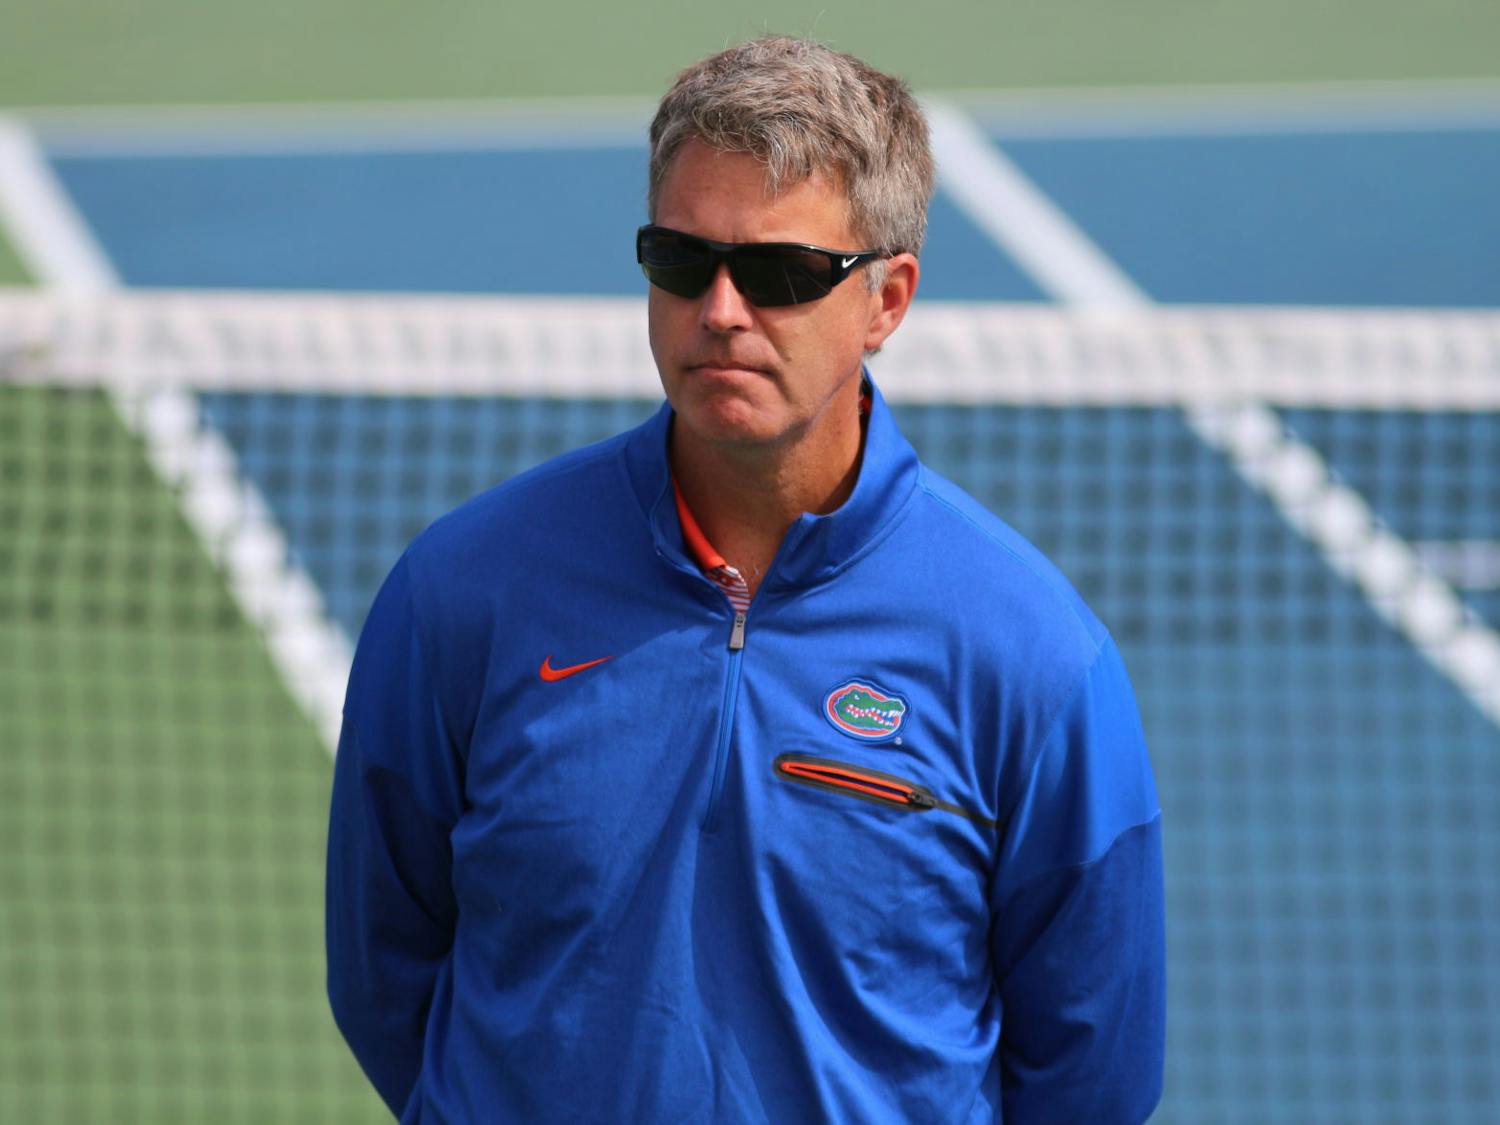 UF women's tennis coach Roland Thornqvist: This year, we have five new players, and so it’s going to take time... If our leaders are two sophomores, no matter how tough and into it they are, they’re still learning.
&nbsp;